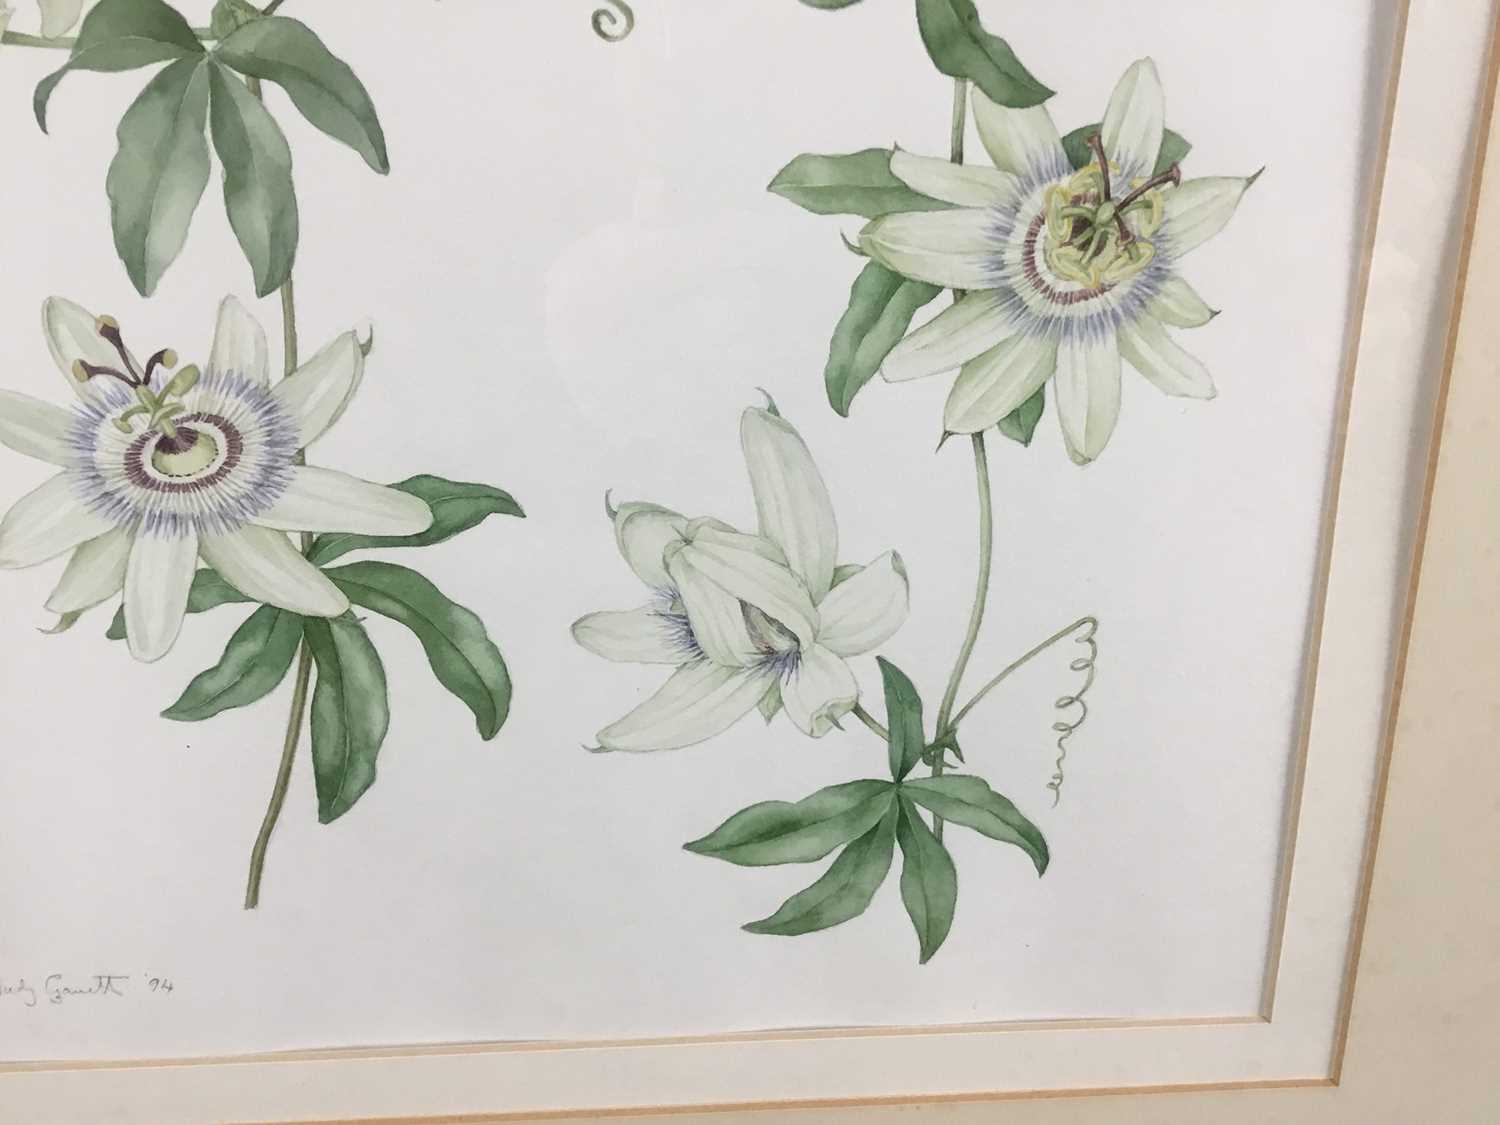 Judy Garett, watercolour - Passion flower, signed and dated '94, 28cm x 42cm, mounted in glazed gilt - Image 4 of 5